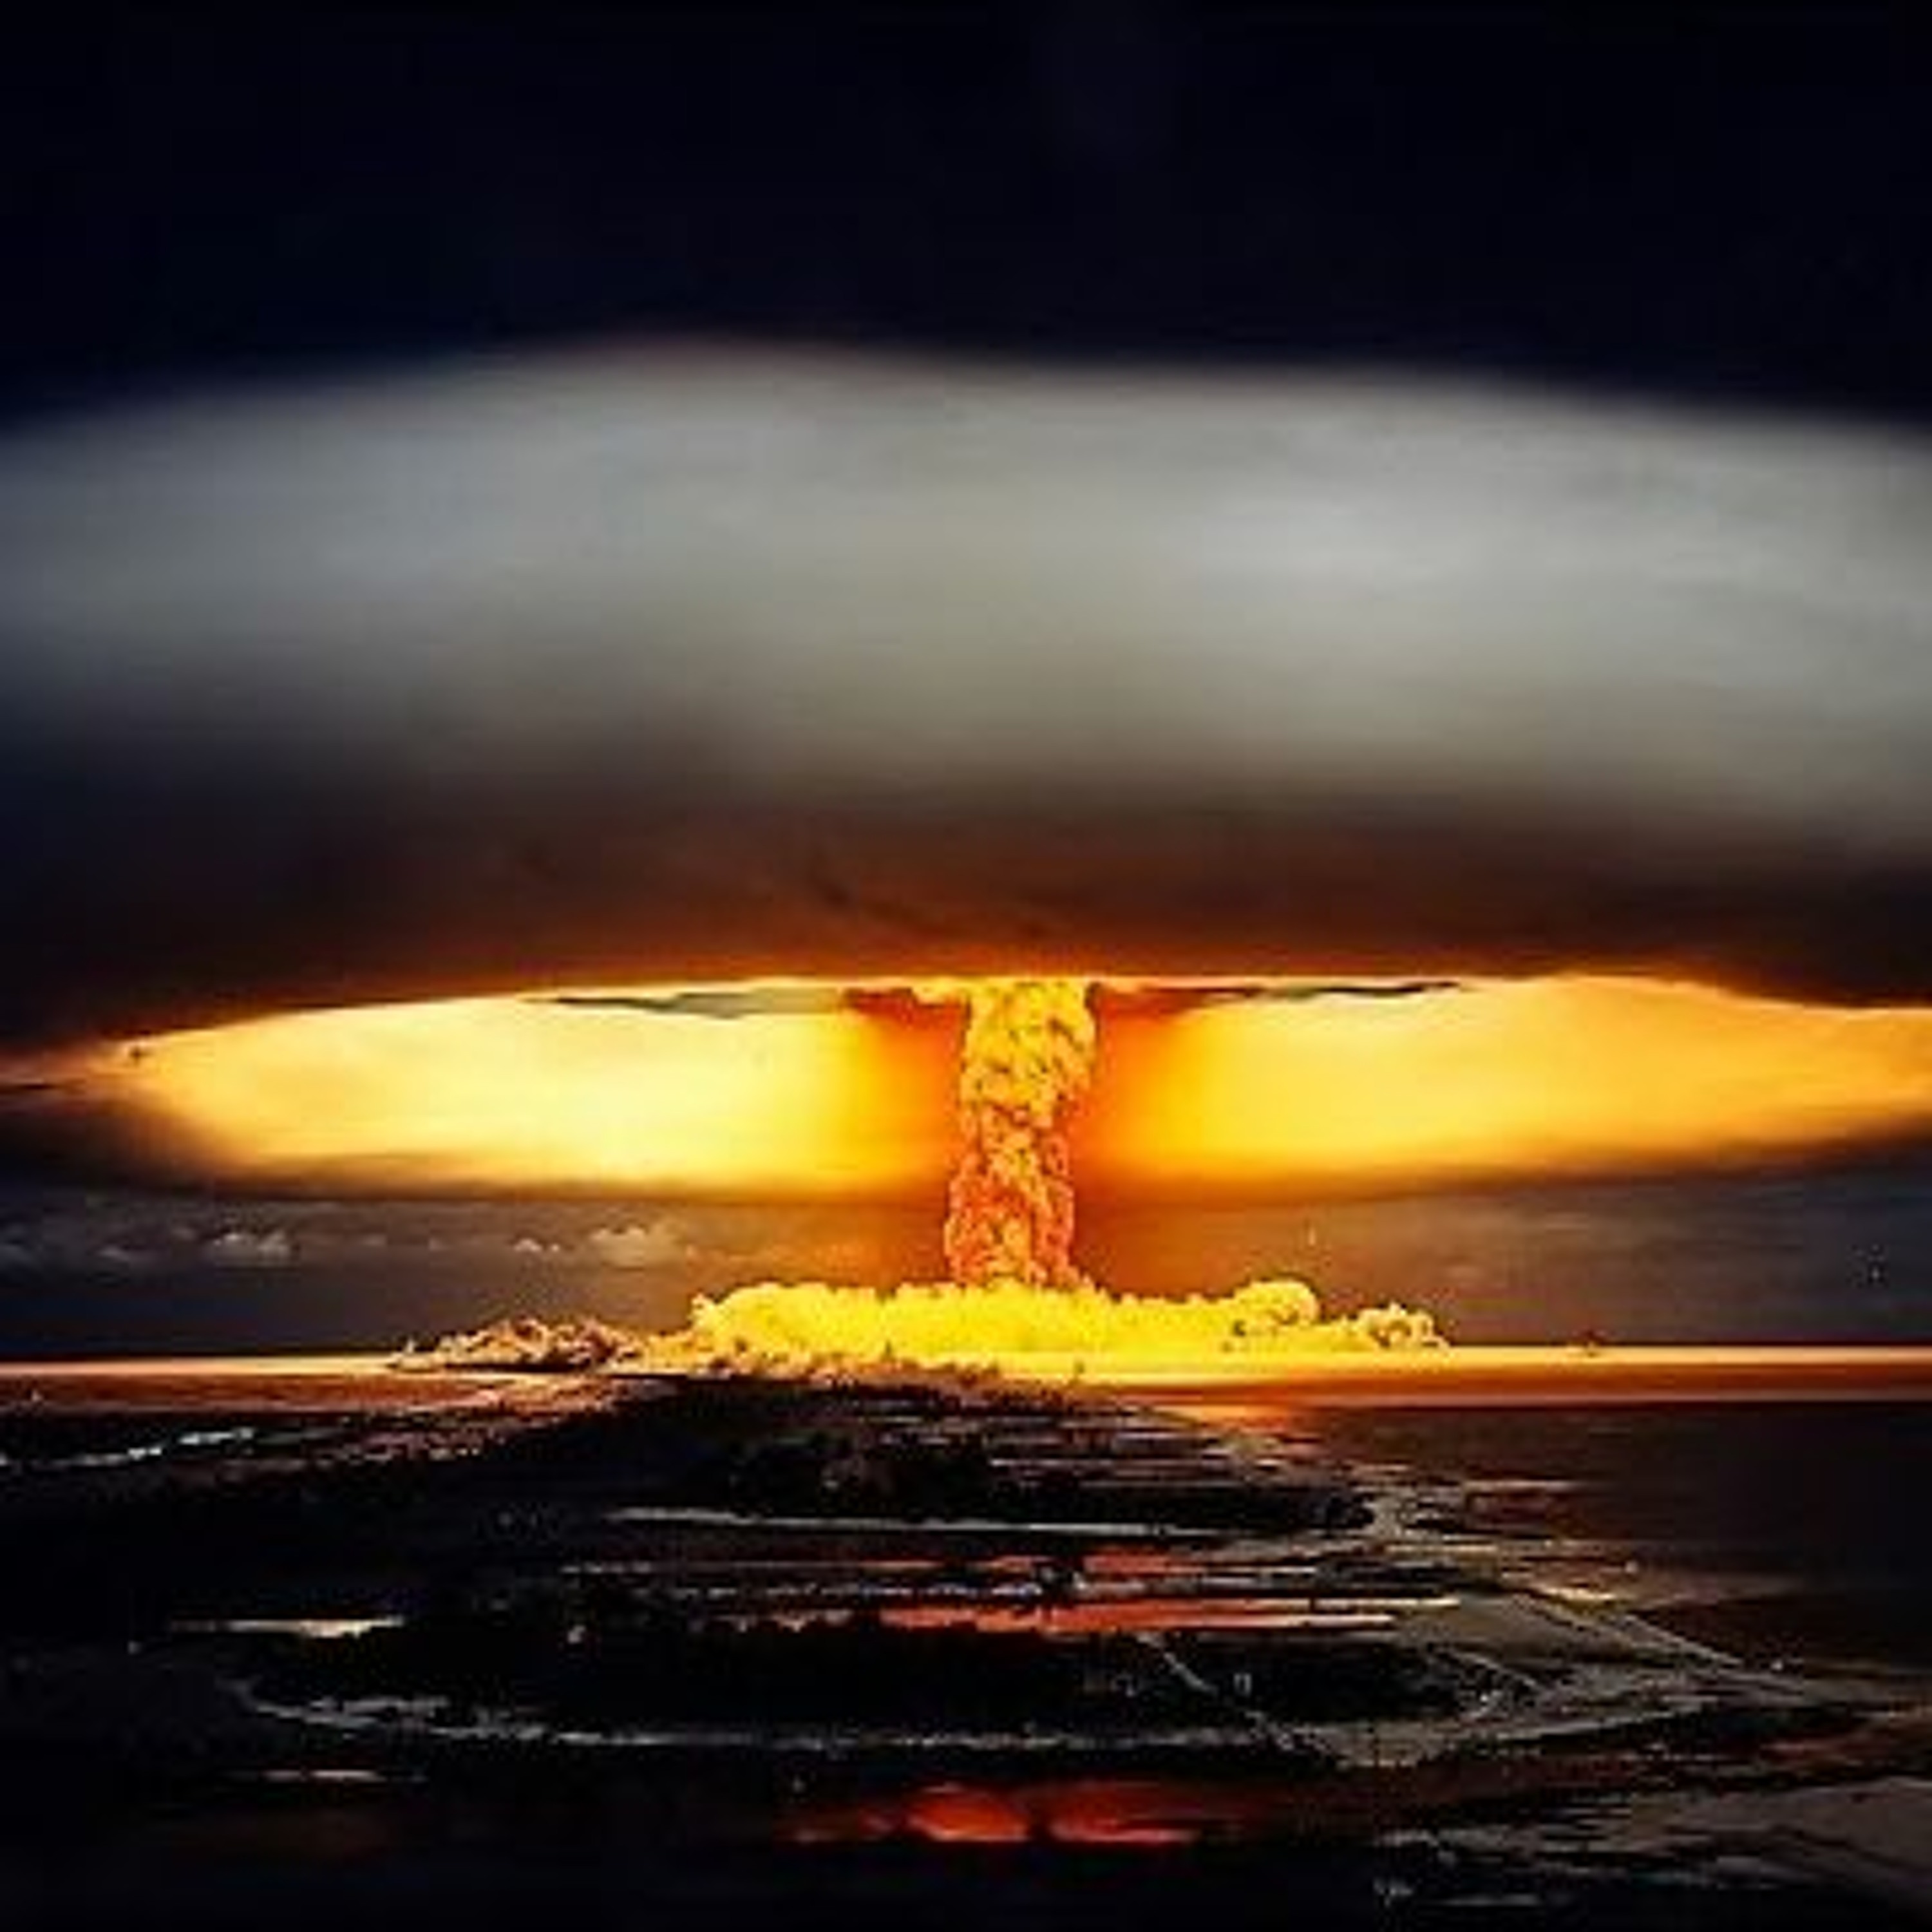 "NUCLEAR DEVASTATION IN AMERICA" 🇺🇸 : AN UNKNOWN FIRST STRIKE & THE AFTERMATH